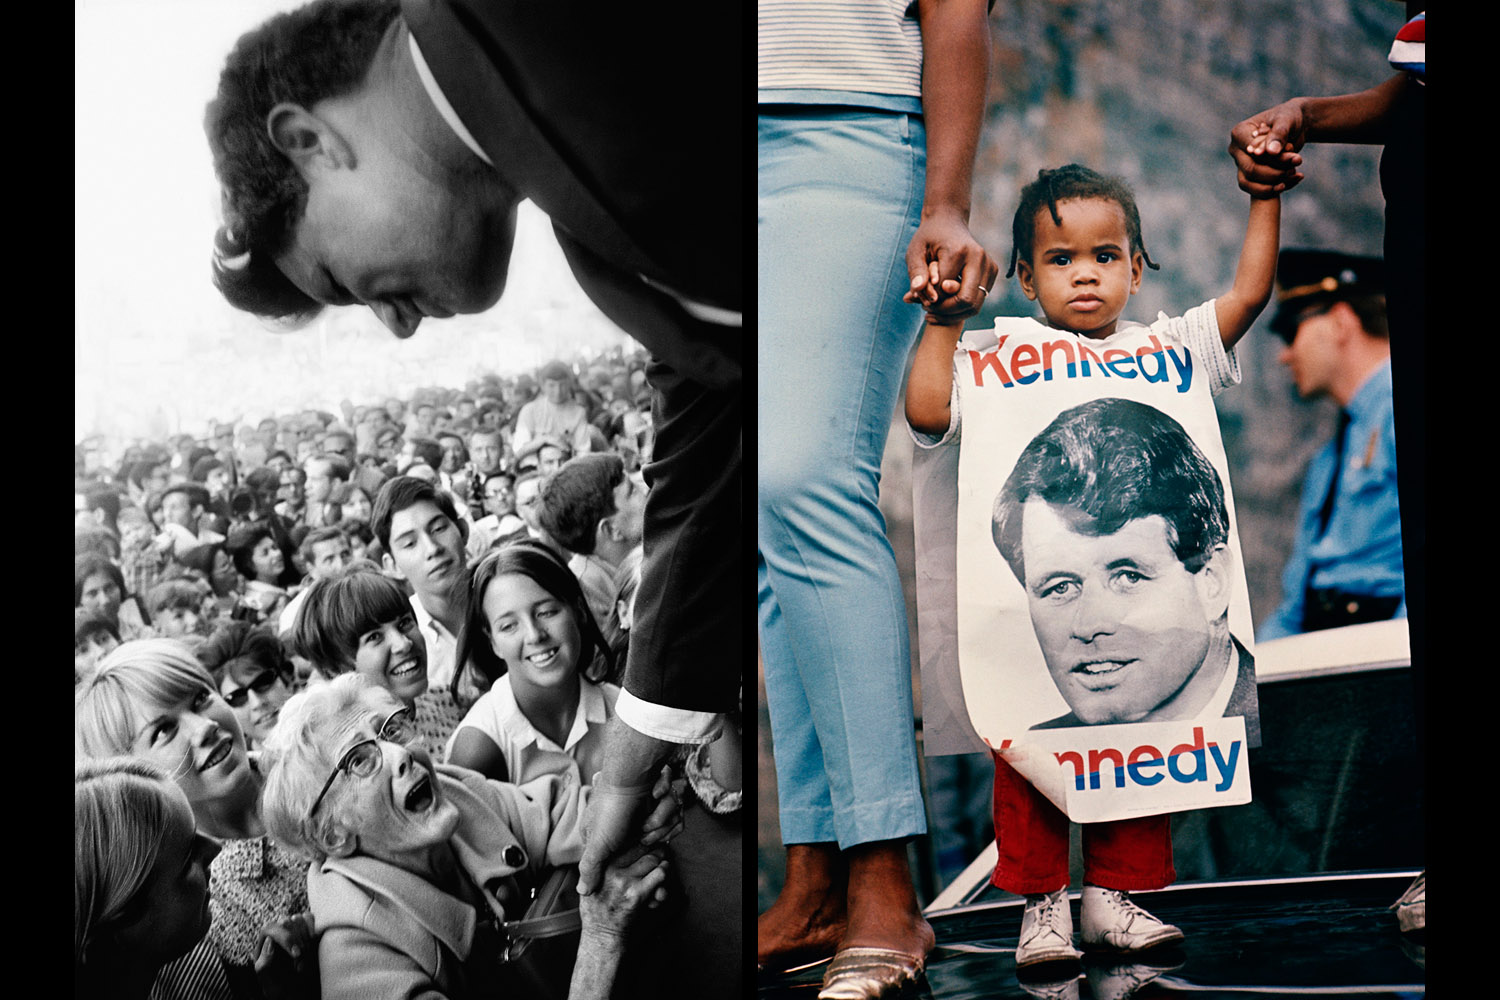 Images: left: Robert Kennedy Campaign, New York, 1966, right: Girl with RFK Poster, 1968